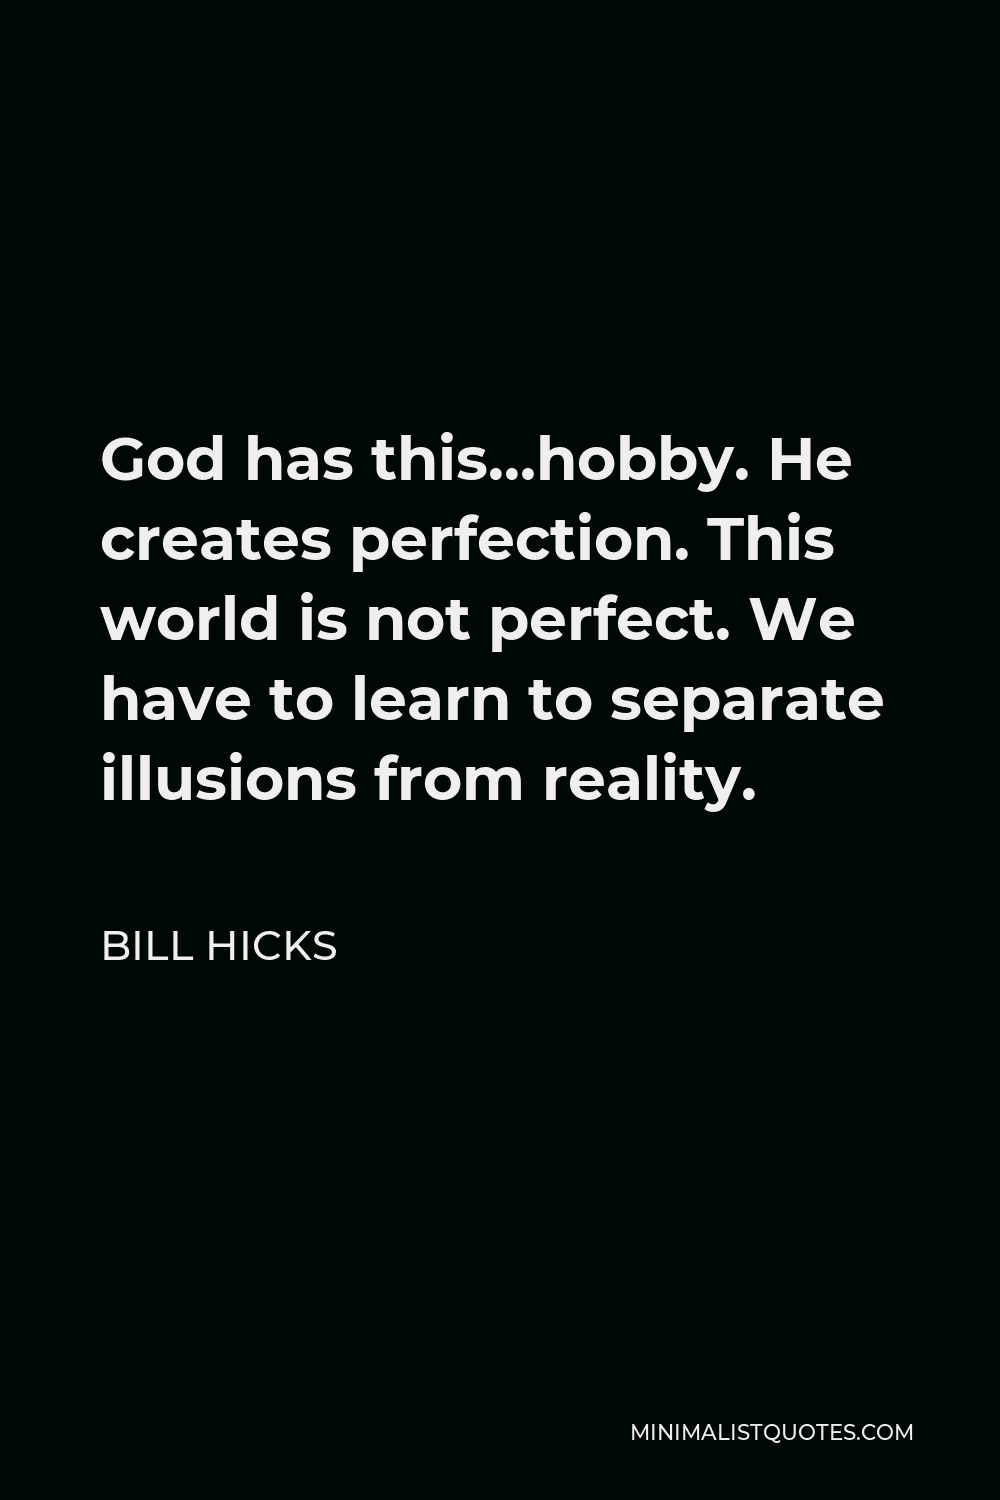 Bill Hicks Quote - God has this…hobby. He creates perfection. This world is not perfect. We have to learn to separate illusions from reality.